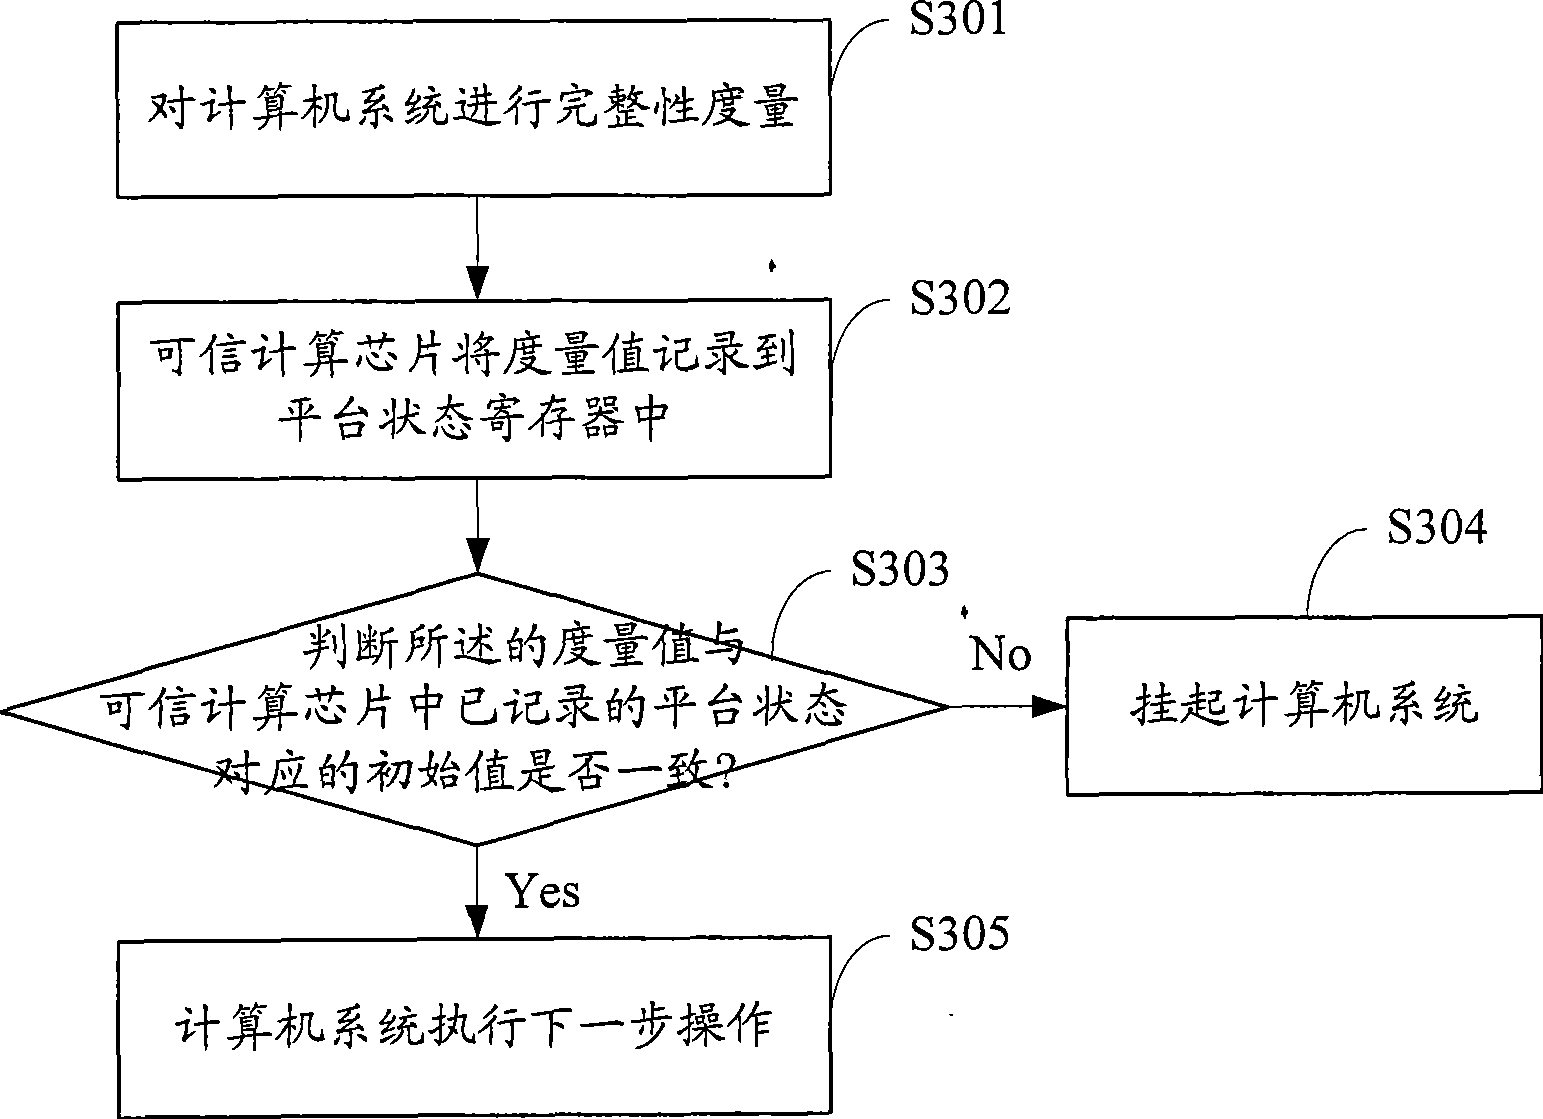 Method for protecting computer system